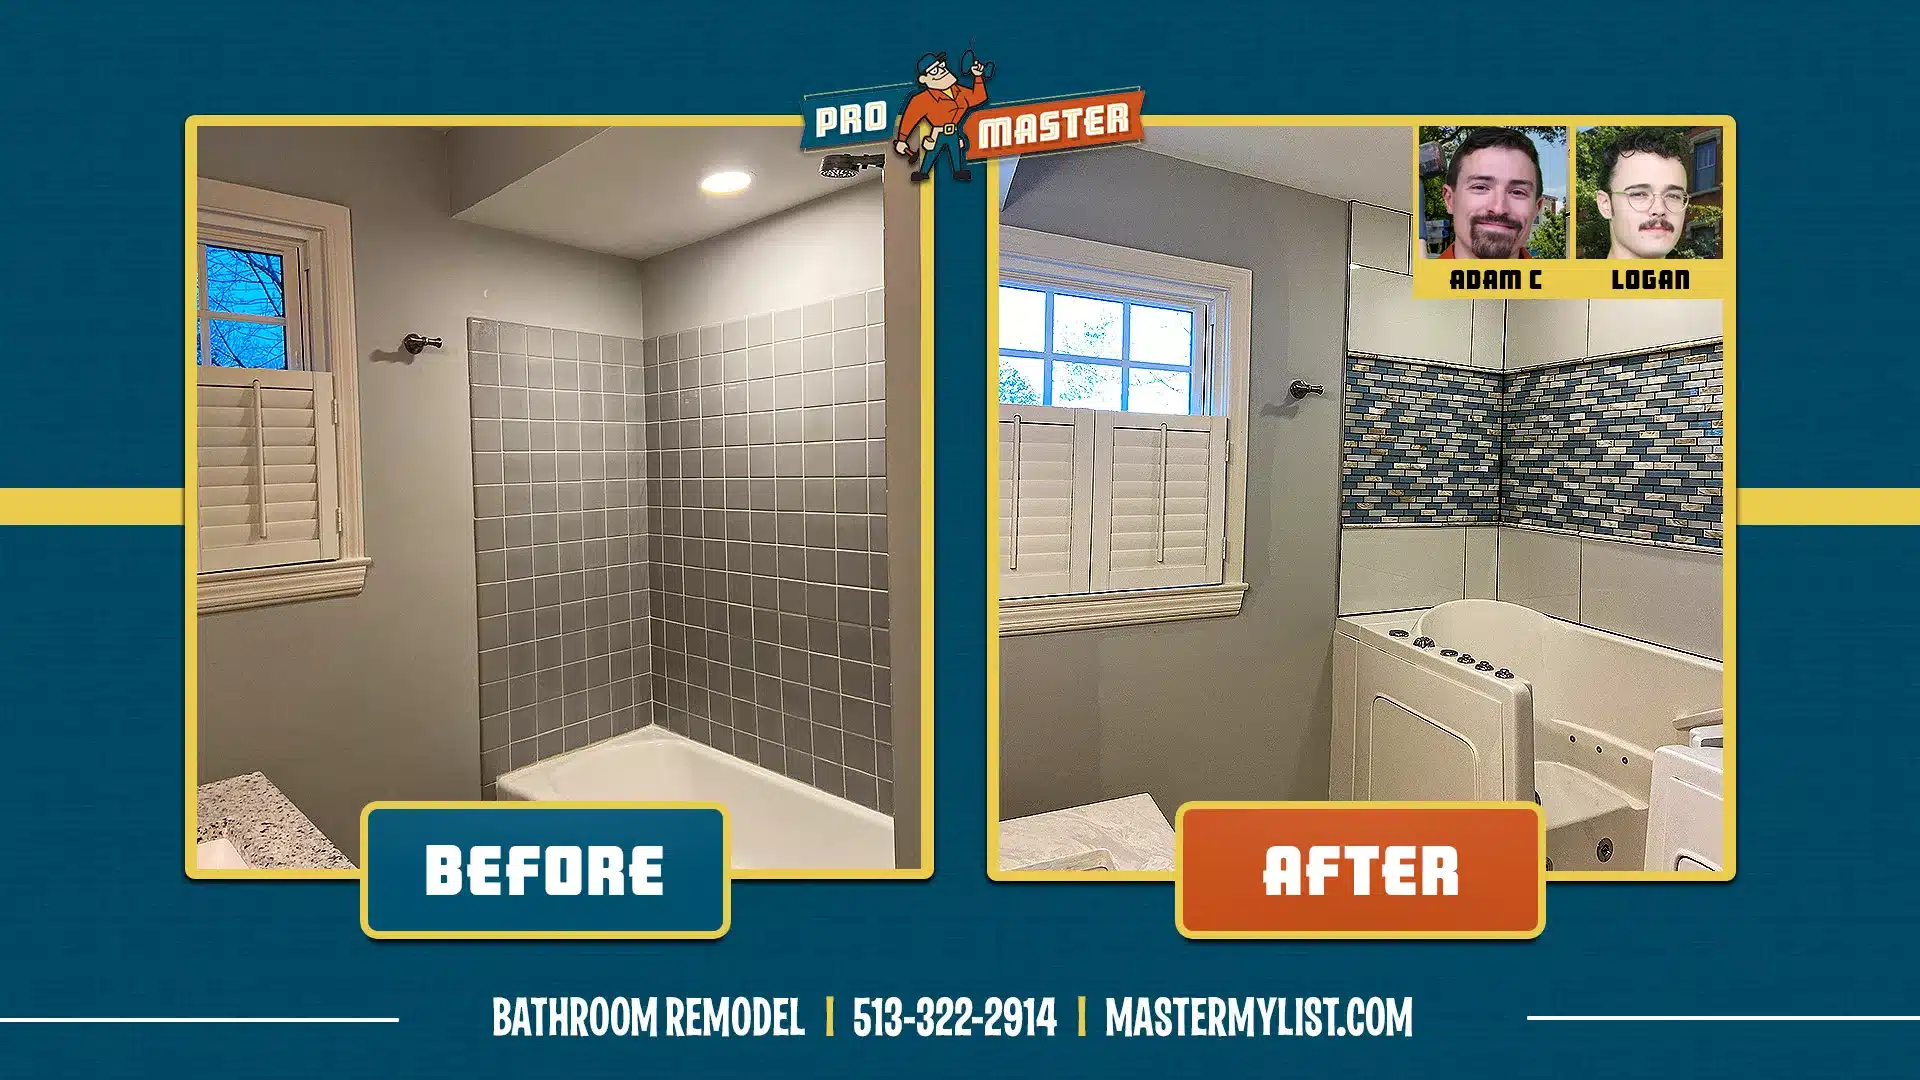 Before and After image of a Bathroom Remodel with Tile Installation in Cincinnati, OH